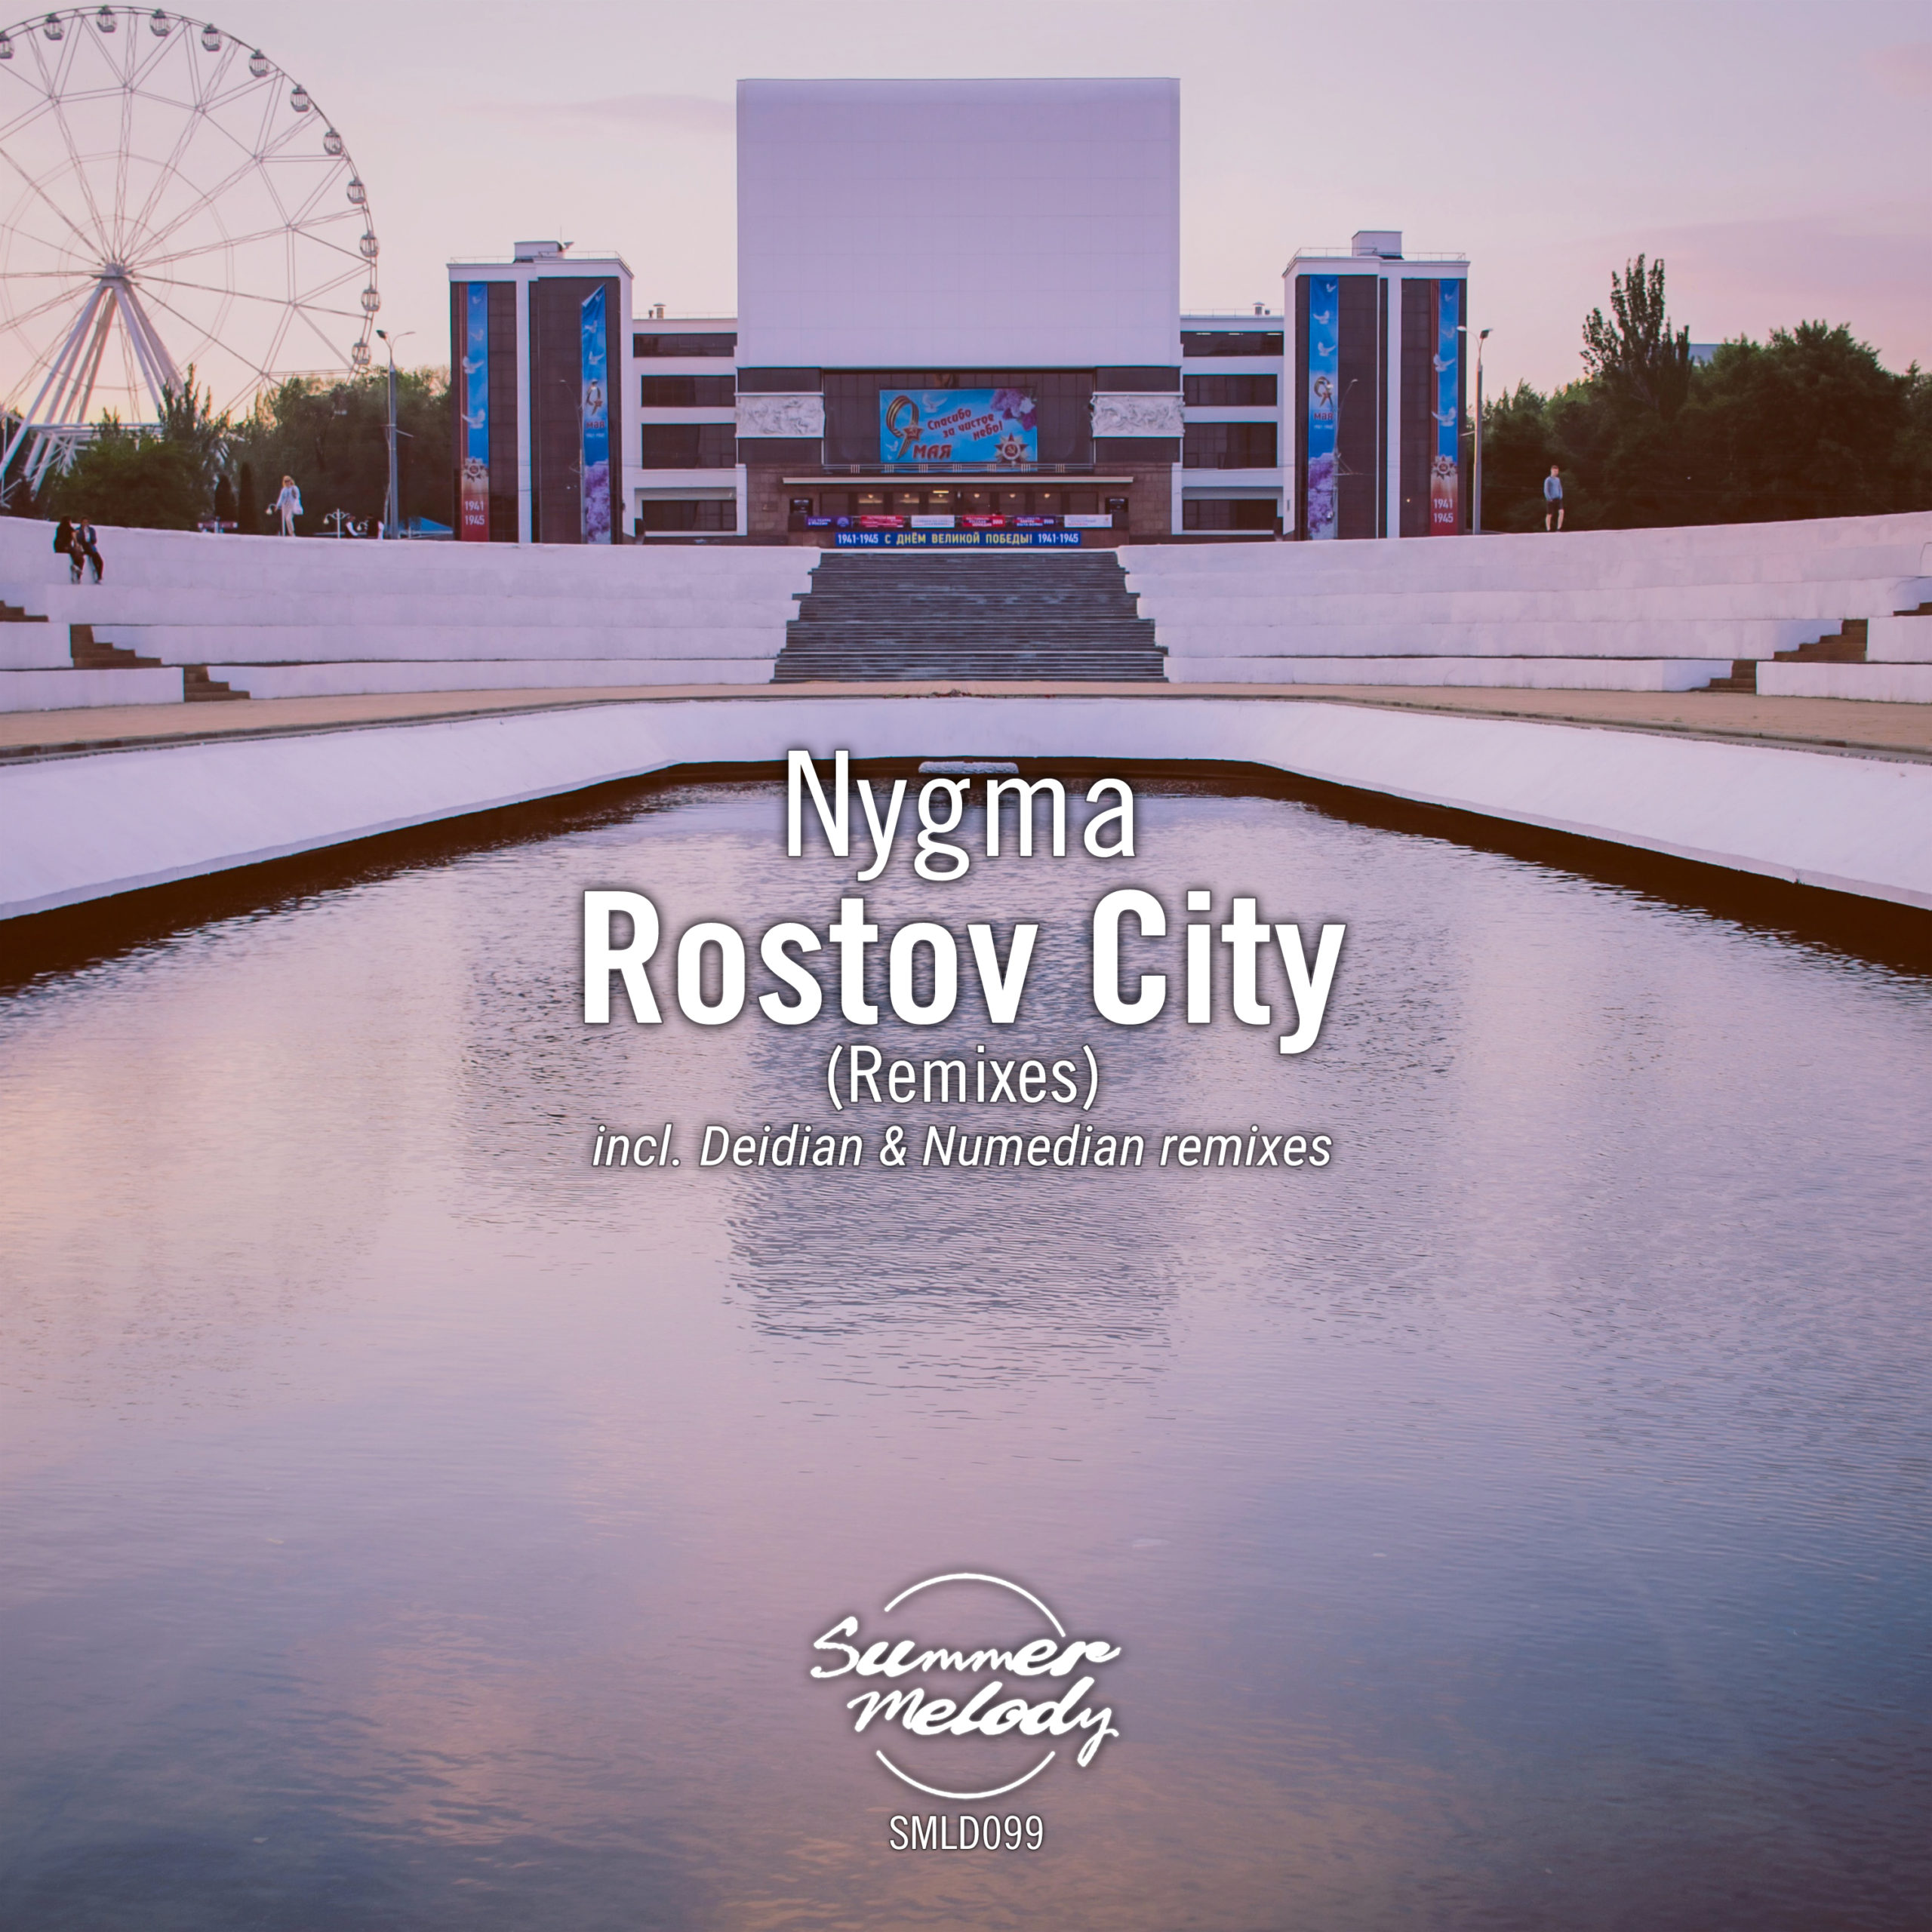 Nygma presents Rostov City (Remixes) on Summer Melody Records